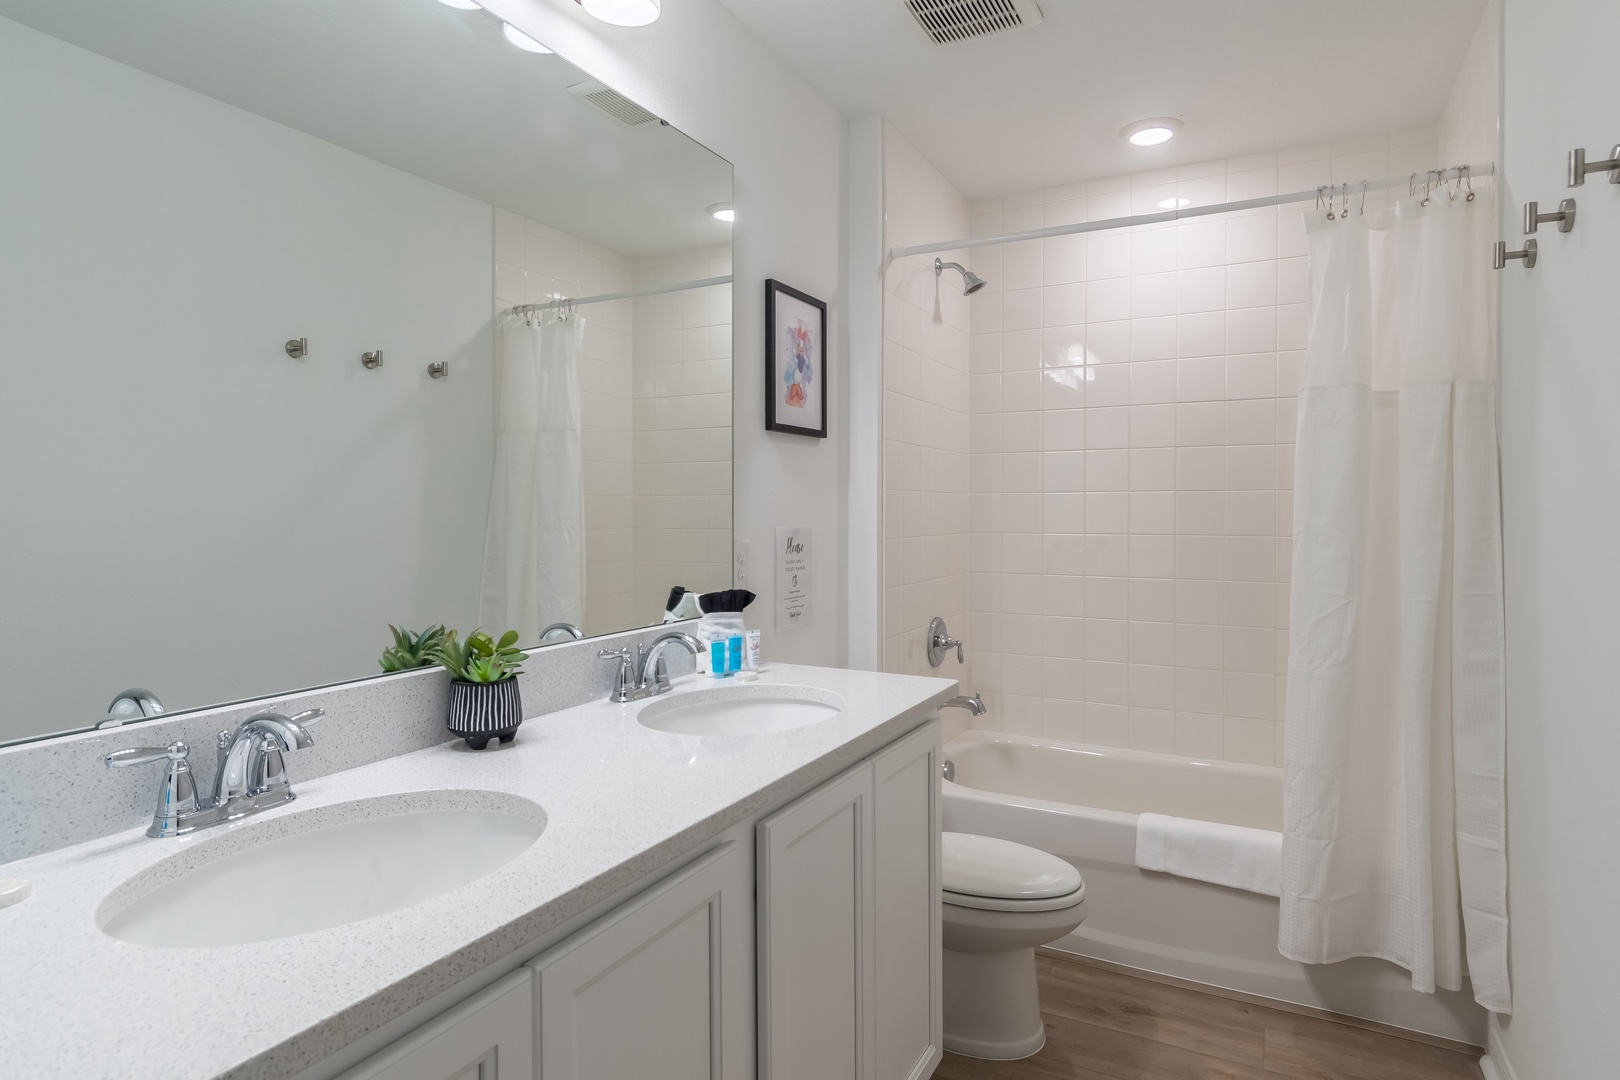 The 2nd floor shared bathroom includes a double vanity & shower/tub combo